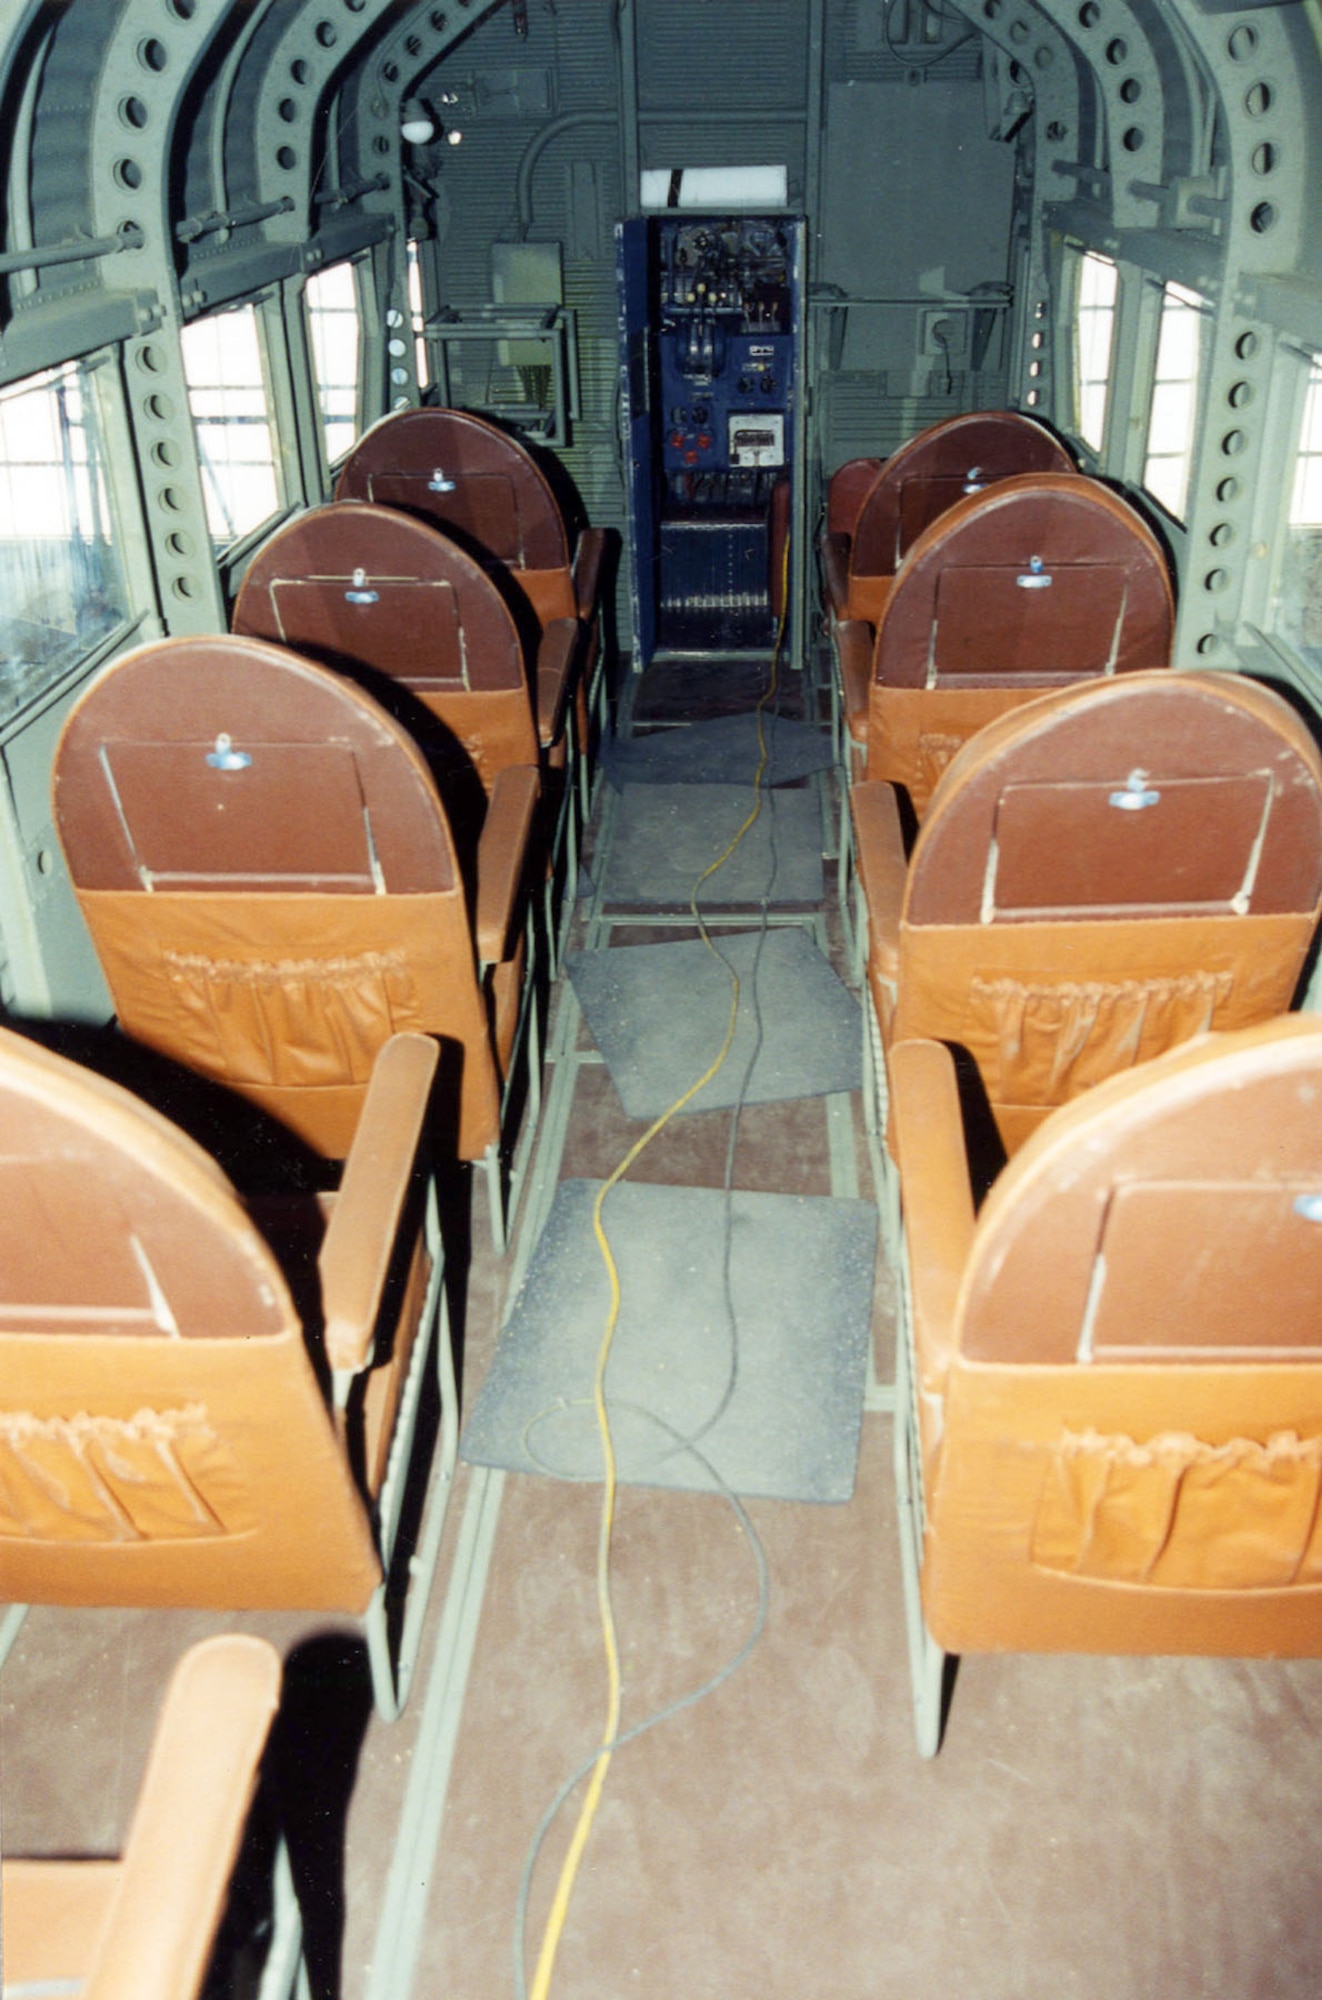 Interior view of the Junkers Ju-52. (U.S. Air Force photo)